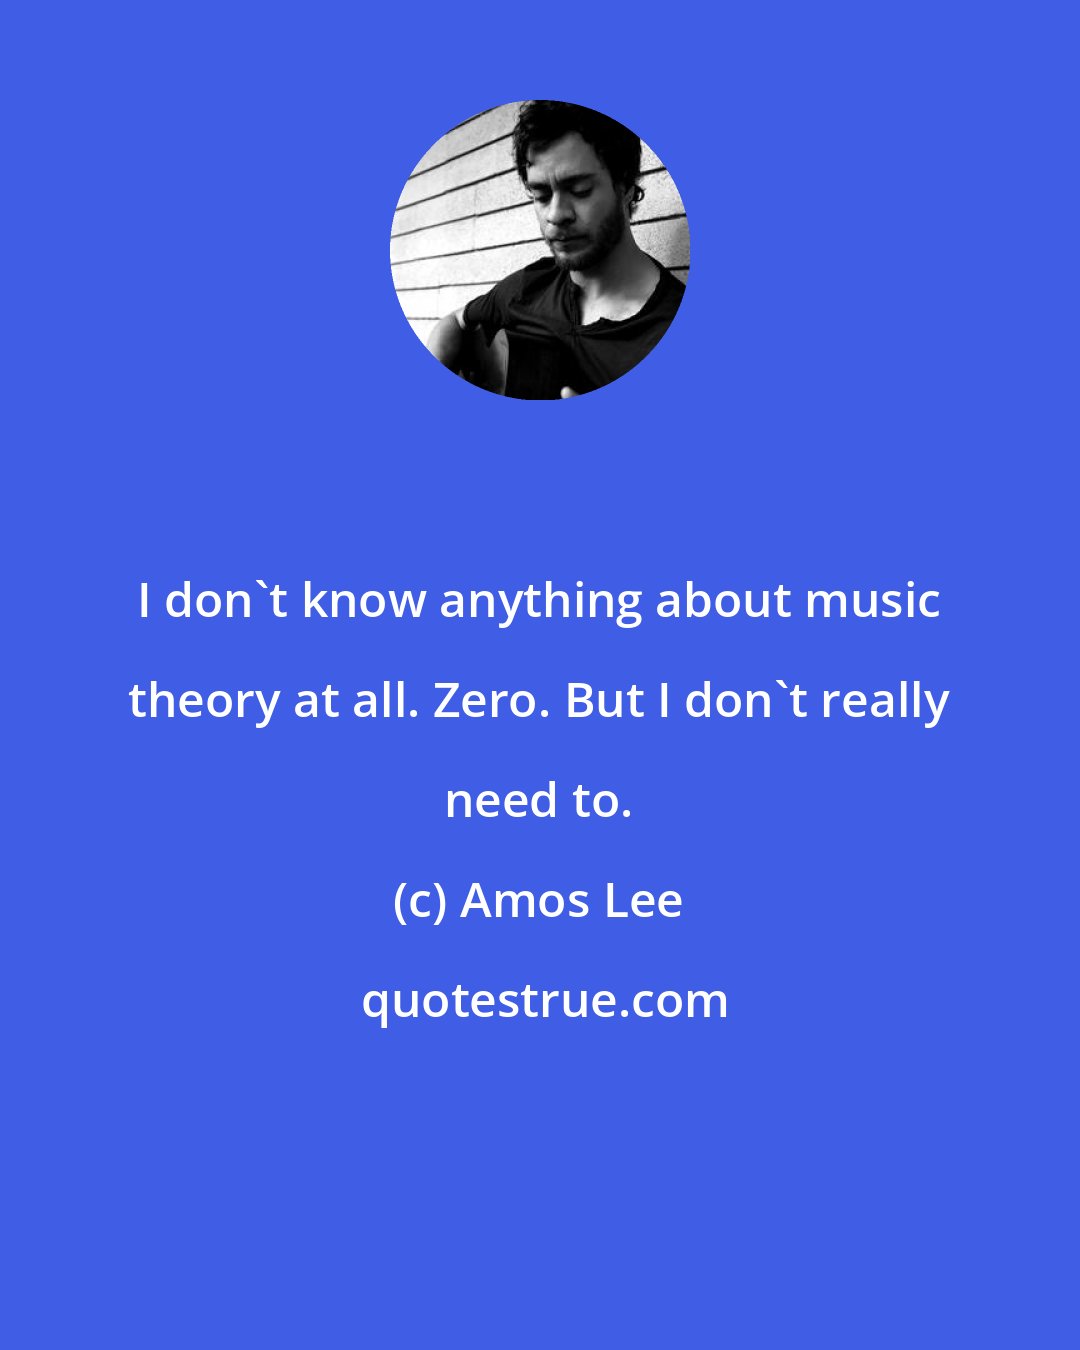 Amos Lee: I don't know anything about music theory at all. Zero. But I don't really need to.